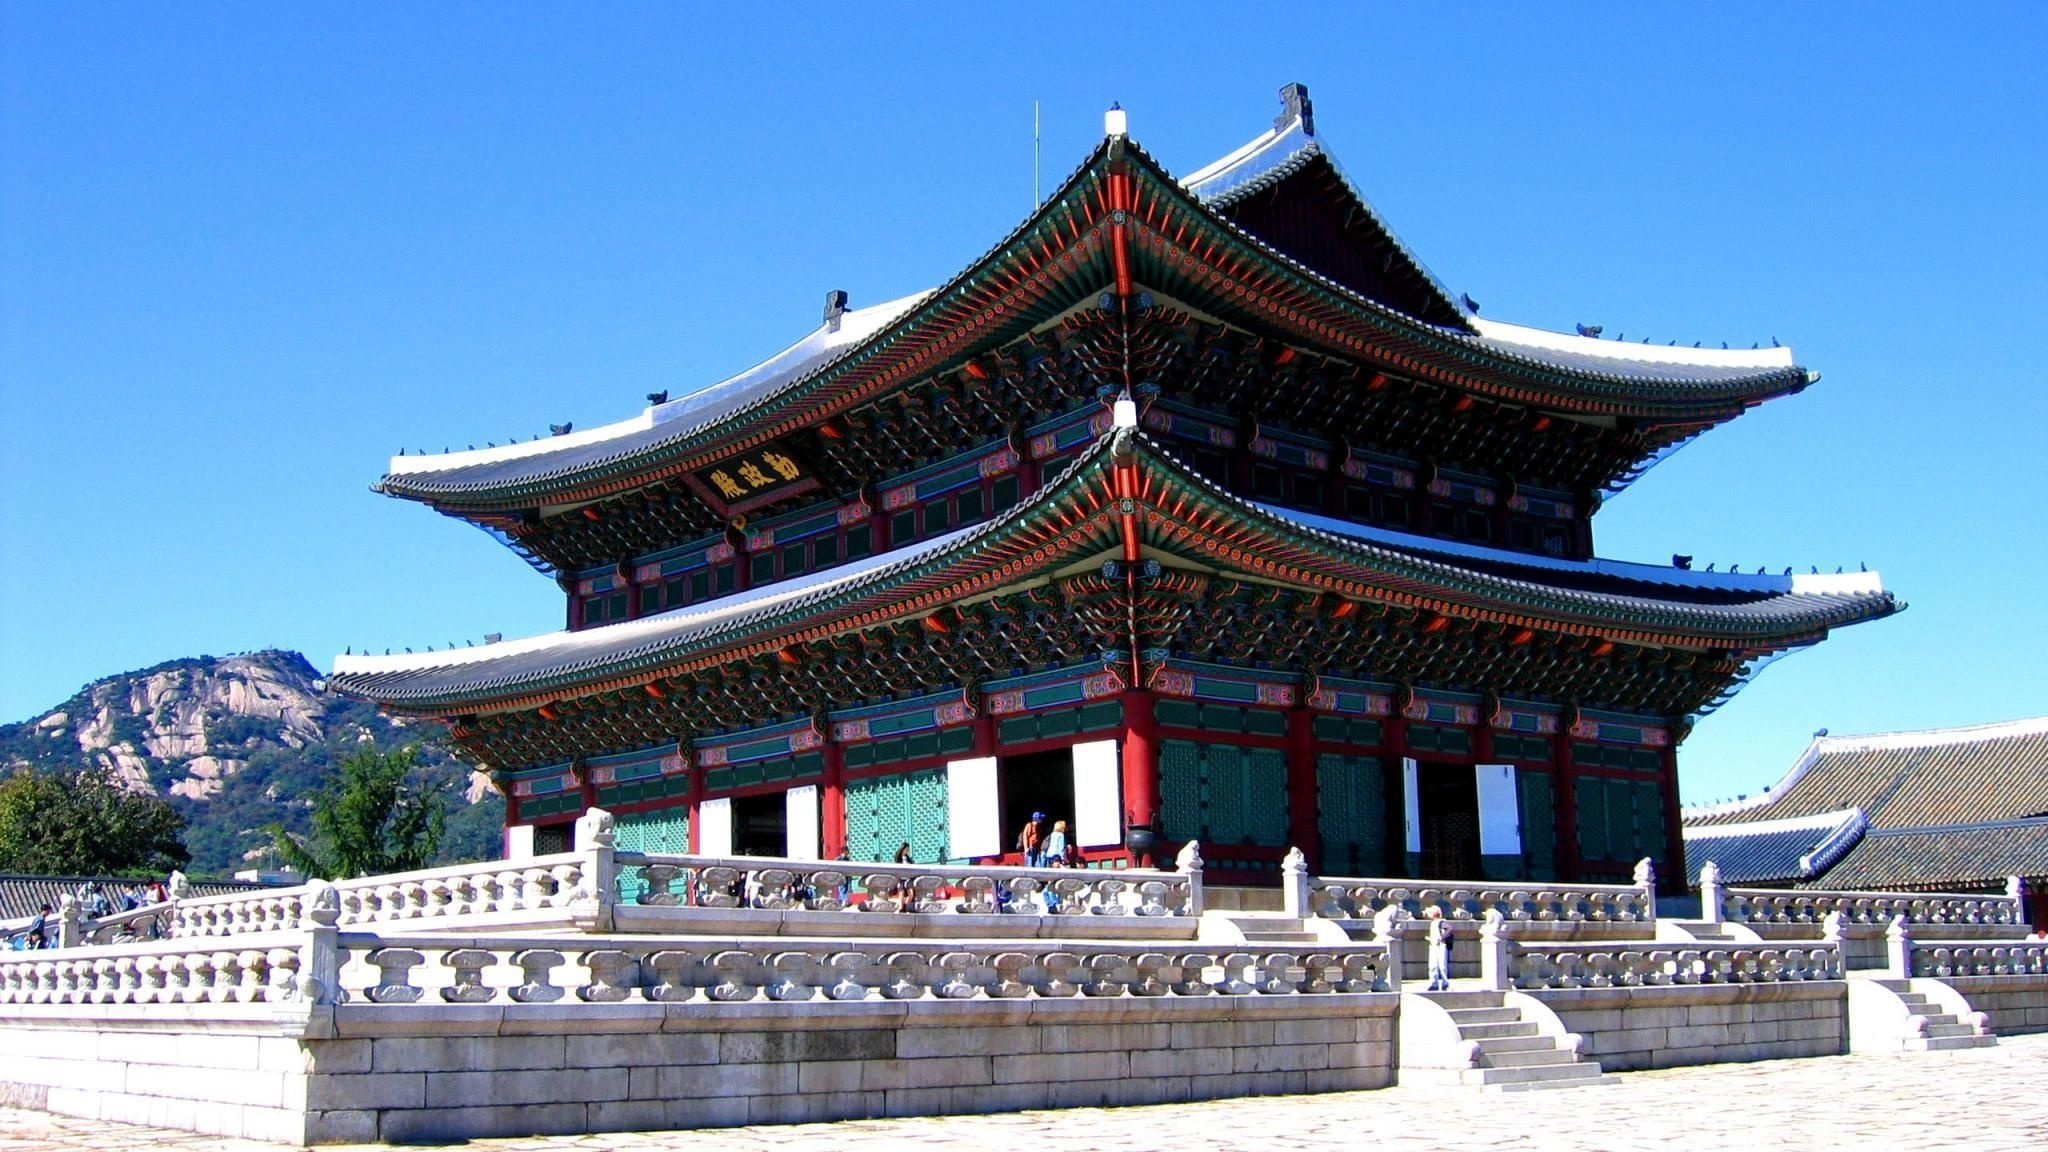 Palace: Gyeongbok Palace, The largest of the Five Grand Palaces built by the Joseon dynasty. 2050x1160 HD Background.